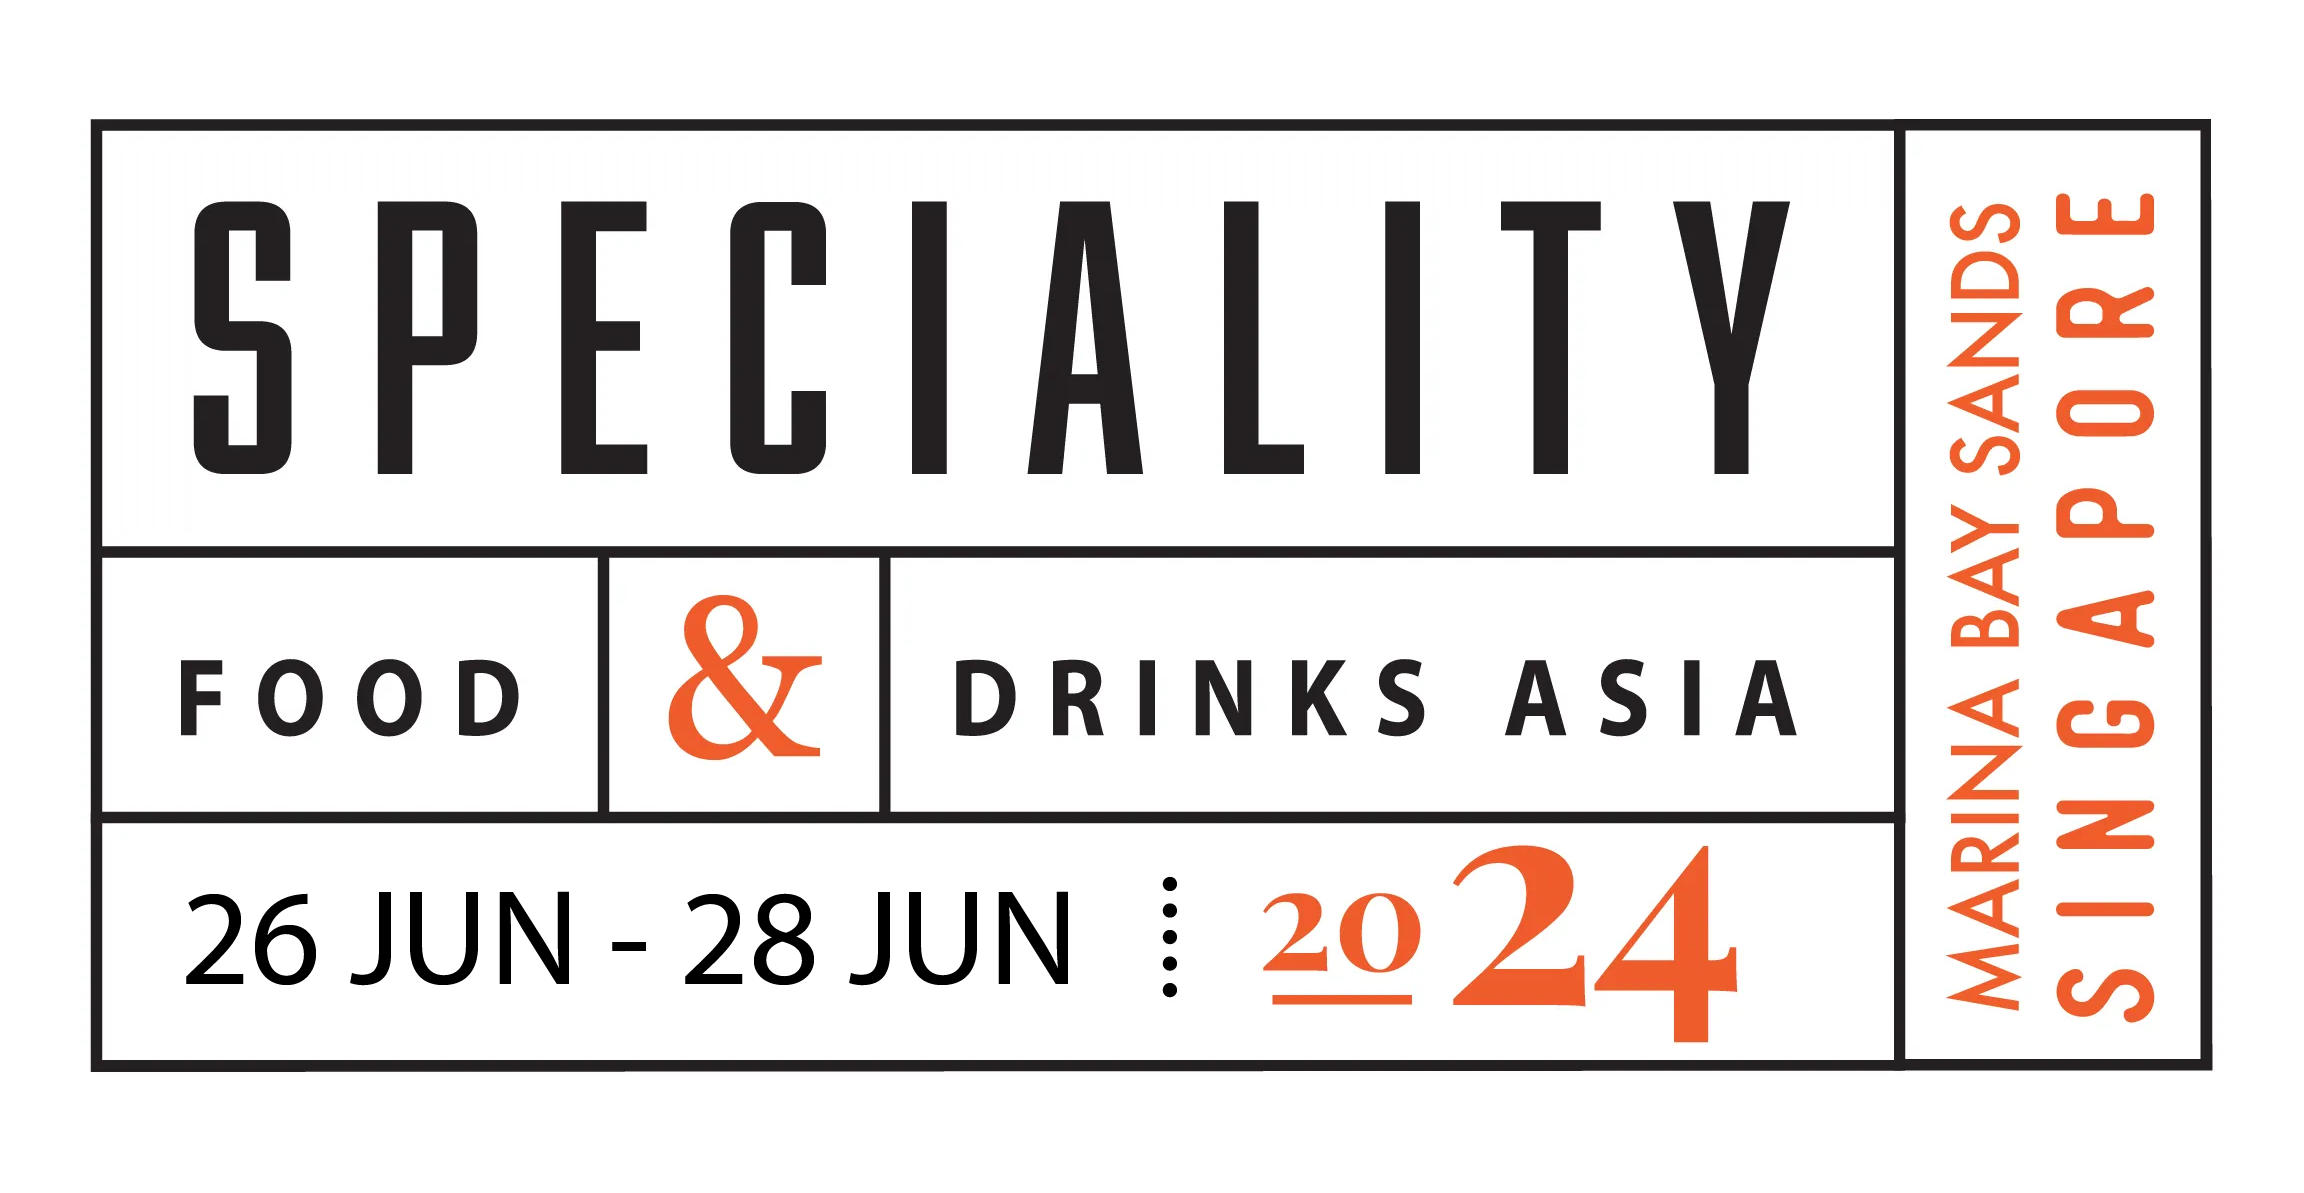 Speciality Food & Drink Asia 2024